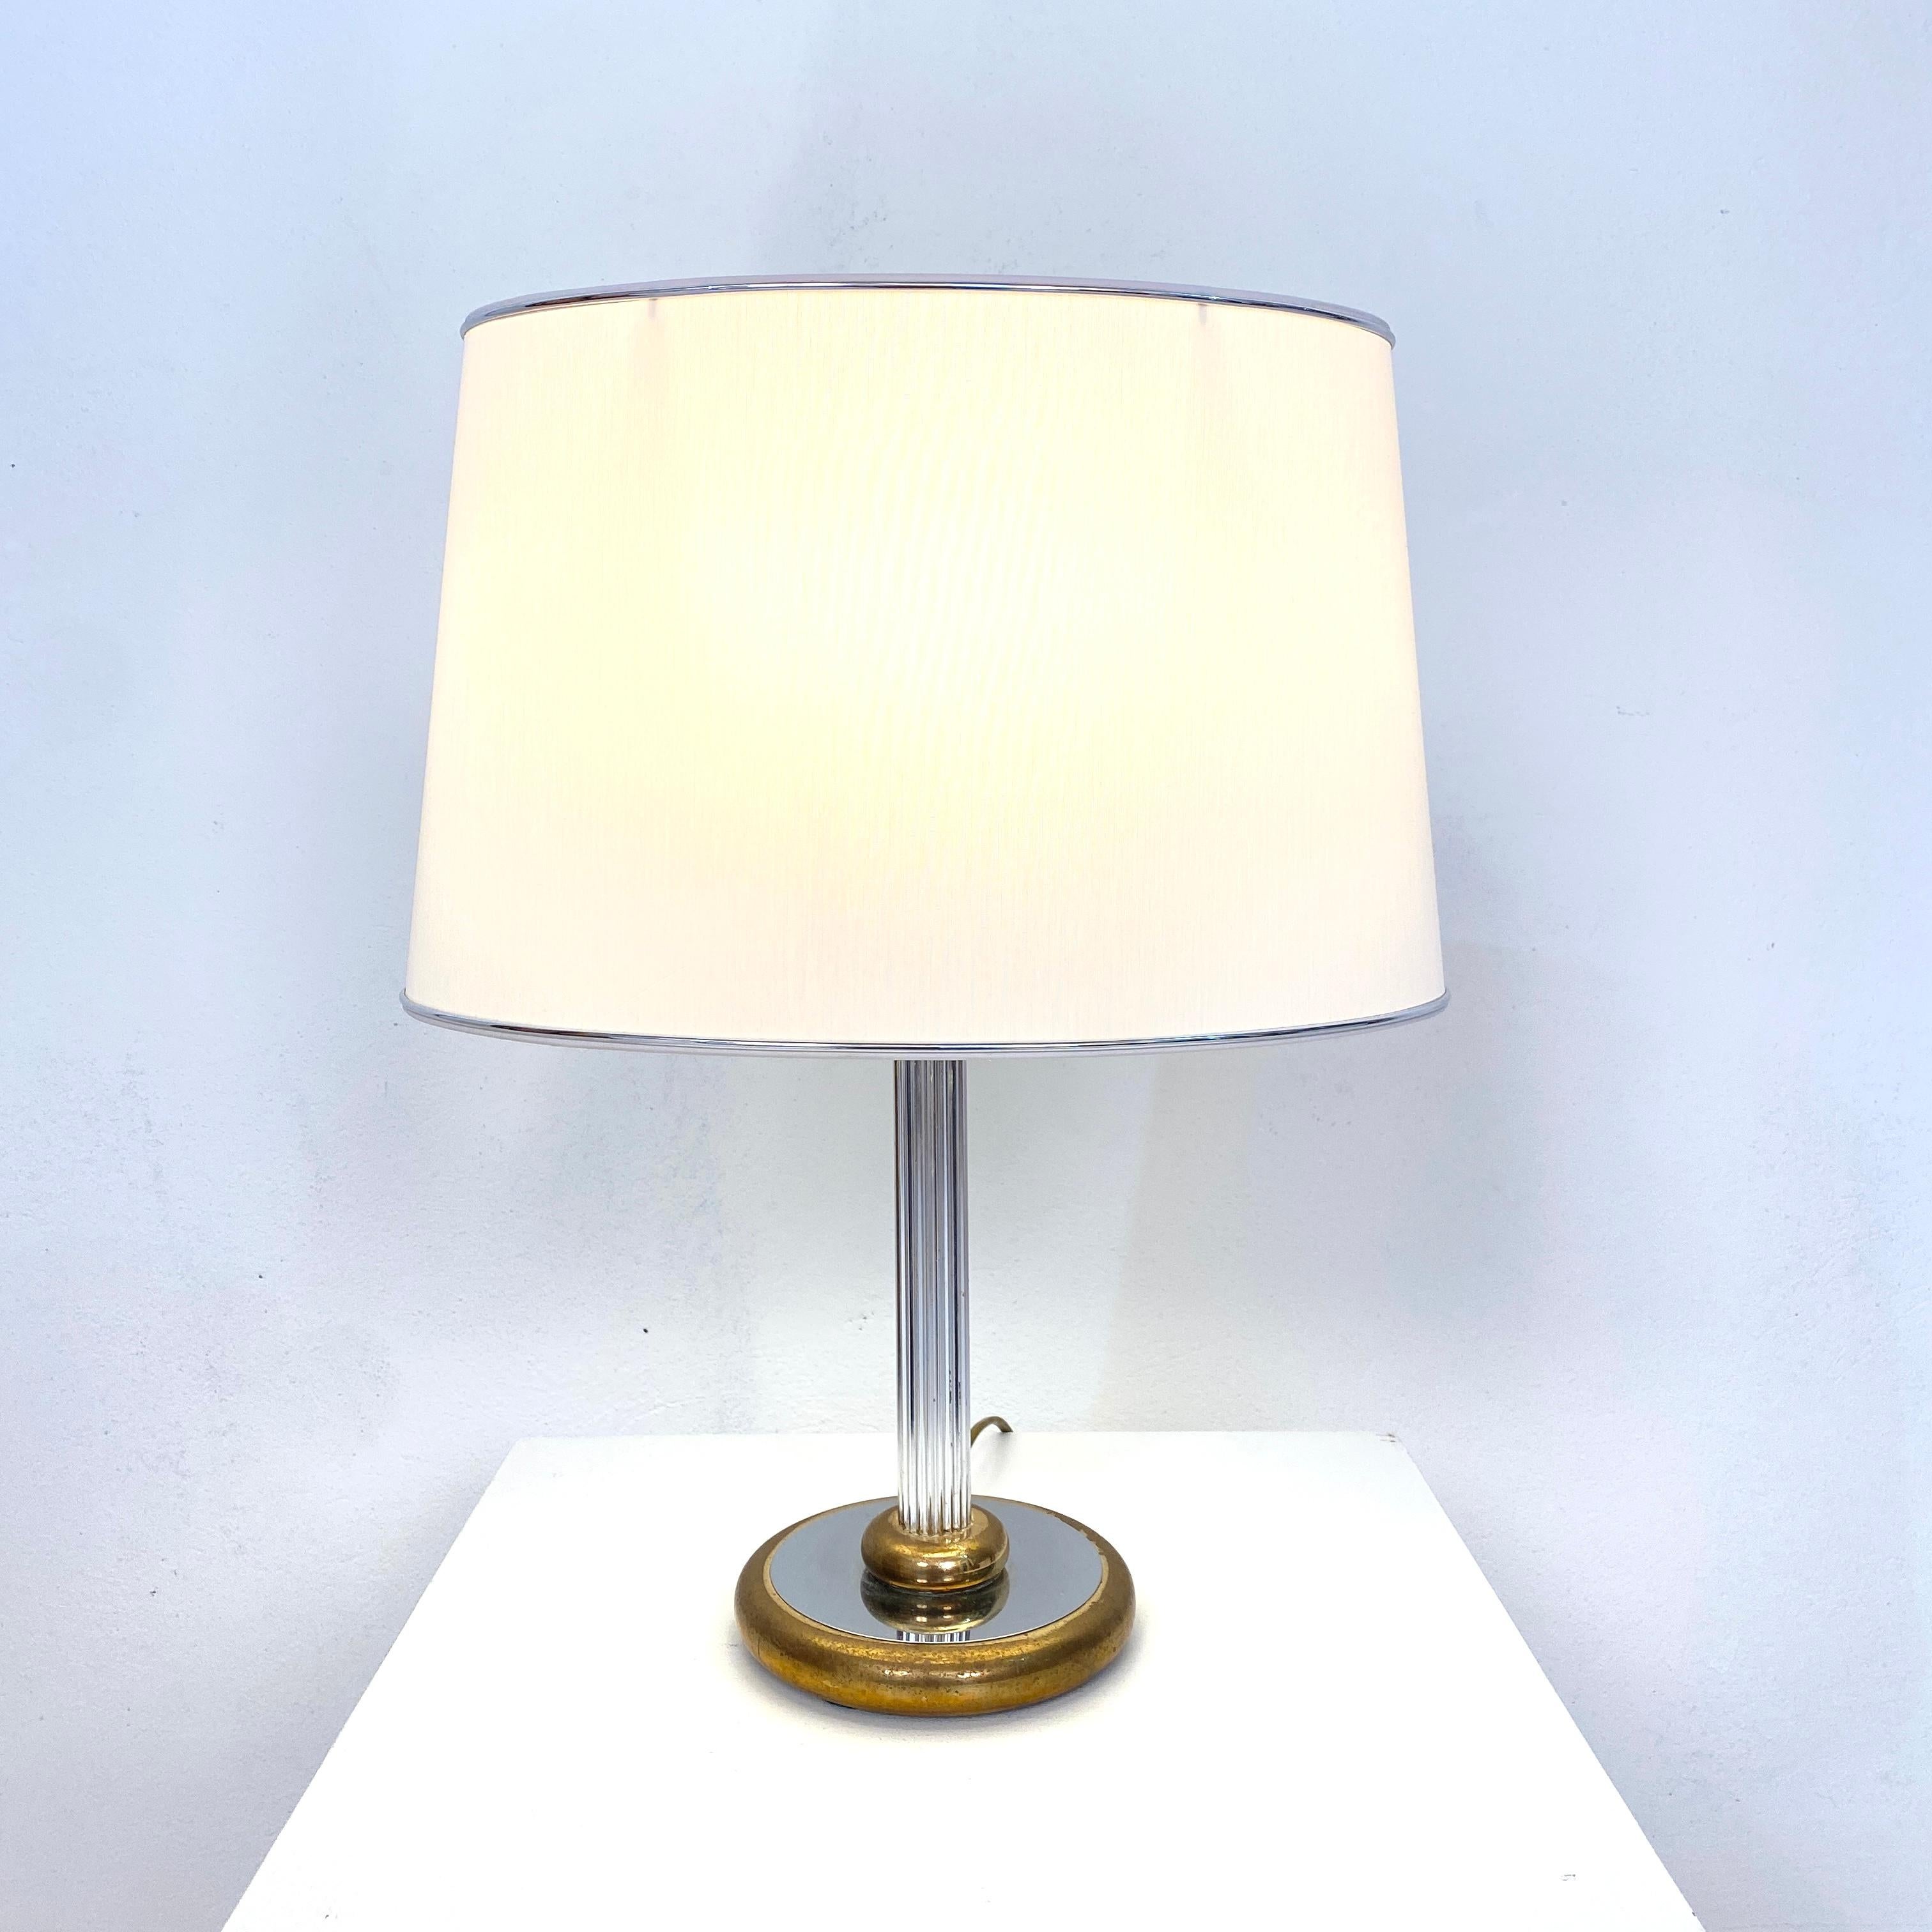 This midcentury table lamp was made by Aro-Leuchte in Germany in the 1970s. It is made out of chrome and brass. The lamp shade is made out of fabric.
There is also a floor lamp in one of my other offers.
A unique piece which is a great eyecatcher